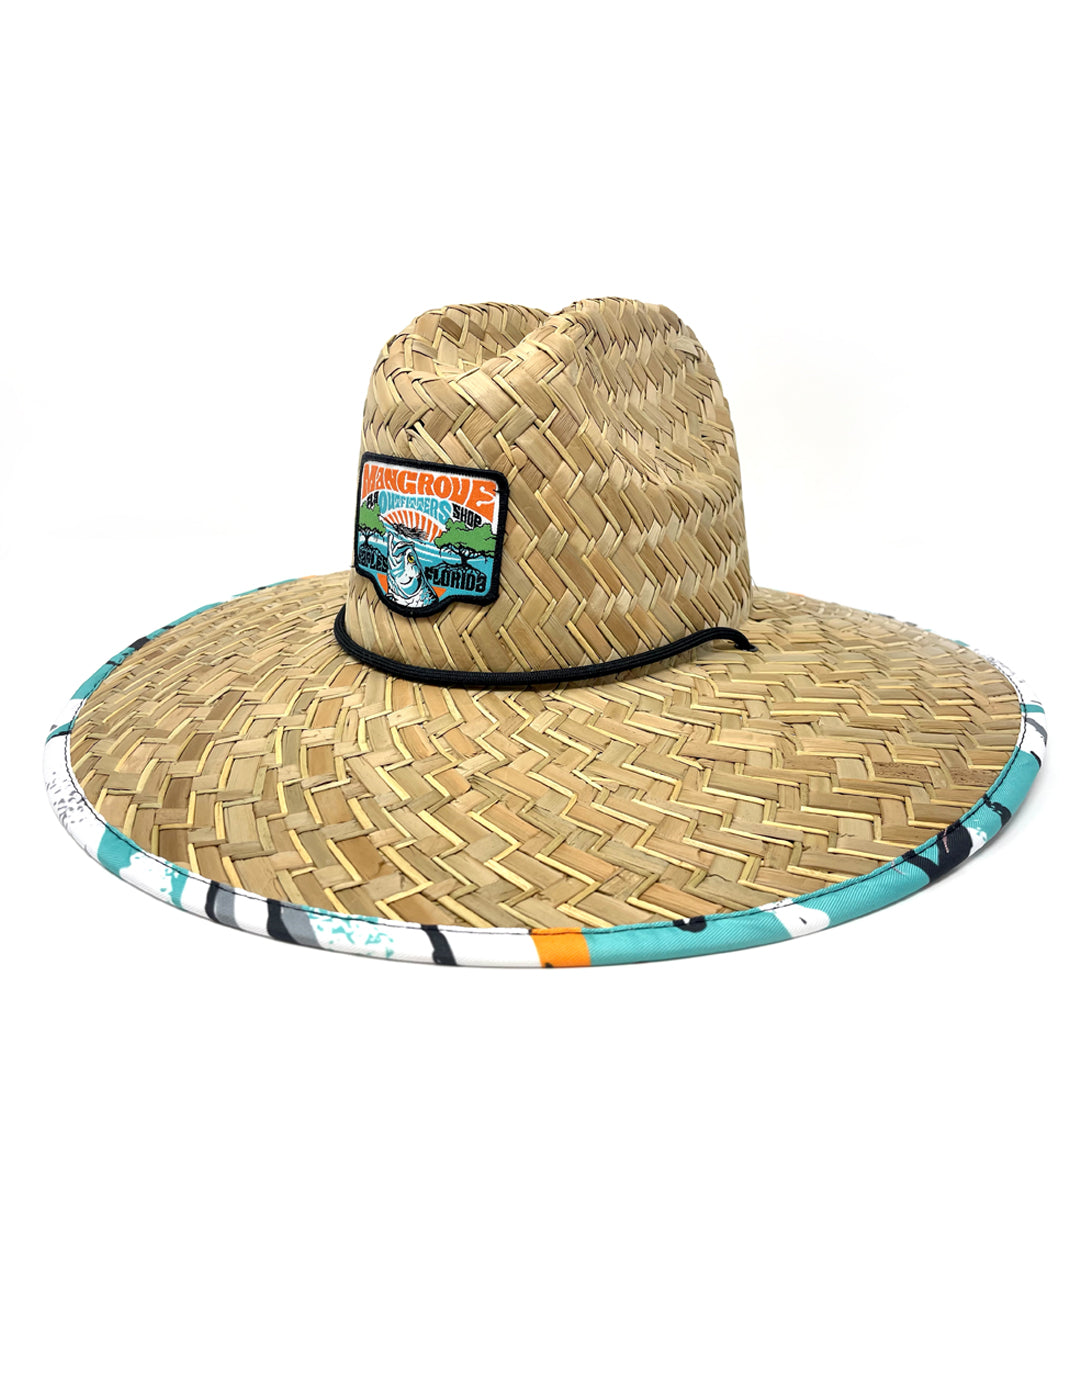 Mangrove Outfitters Trippy Tarpon Straw Hat.